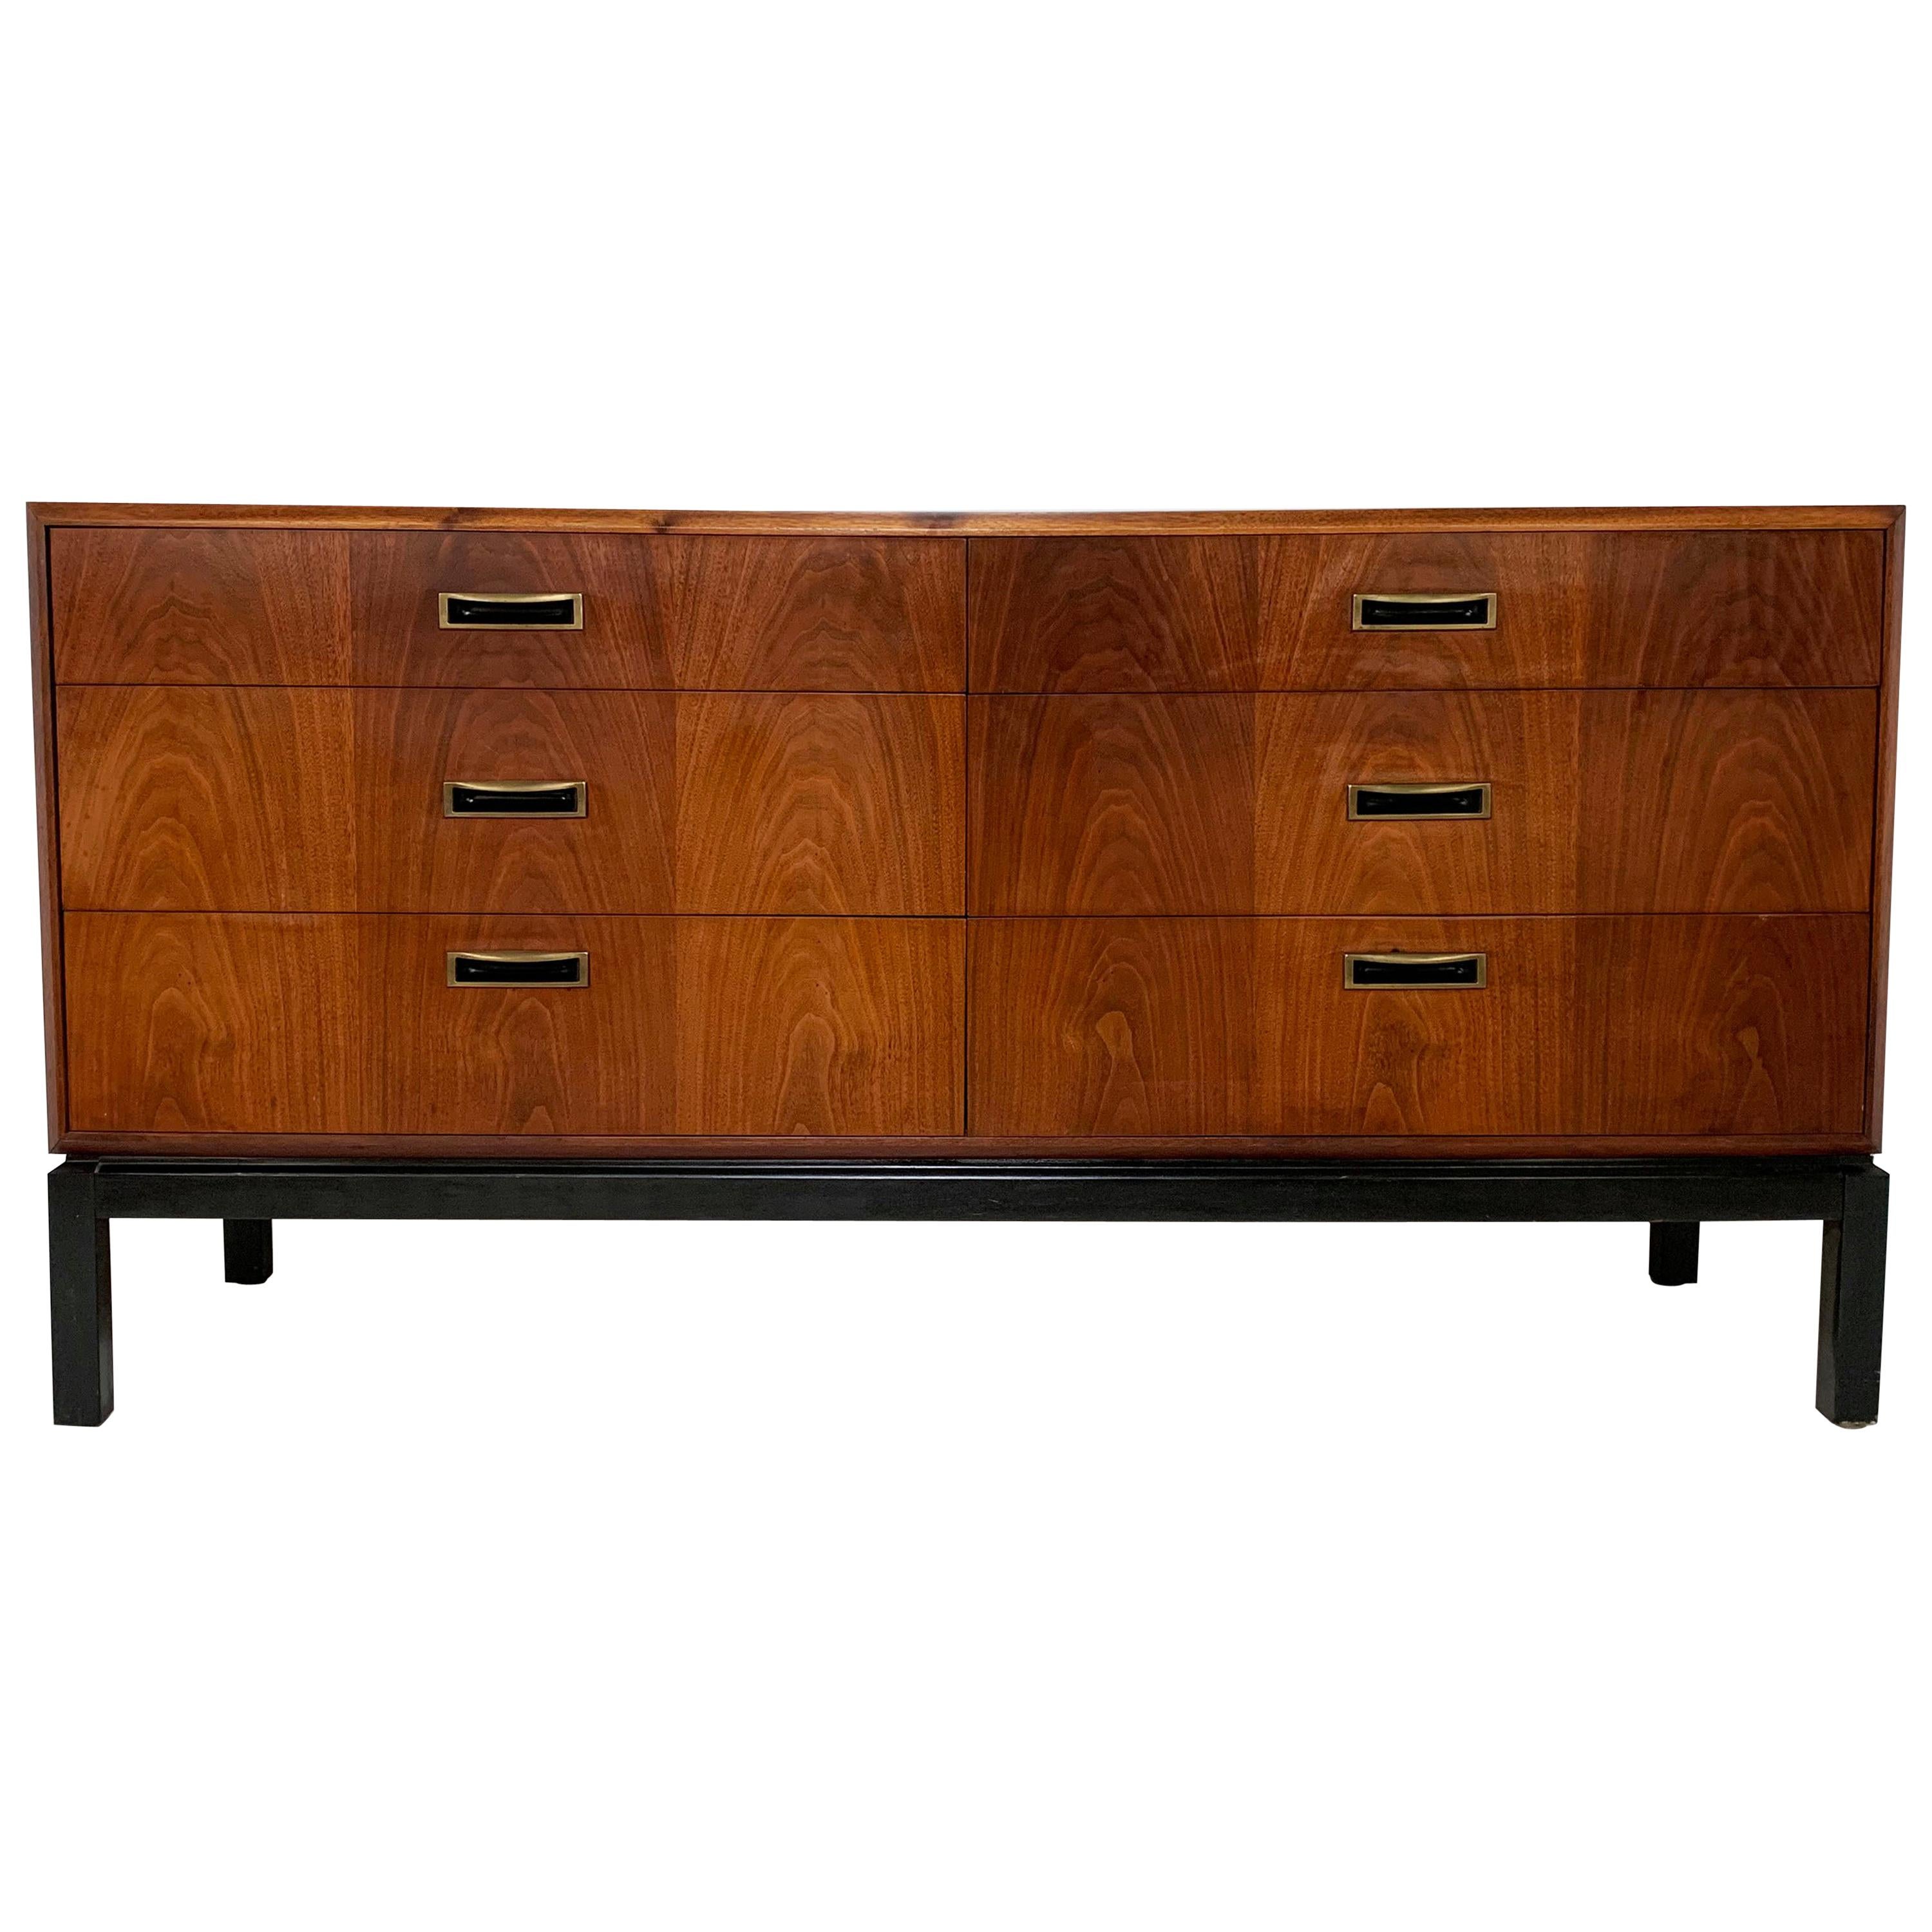 Midcentury Six-Drawer Walnut Dresser by Jack Cartwright for Founders circa 1970s